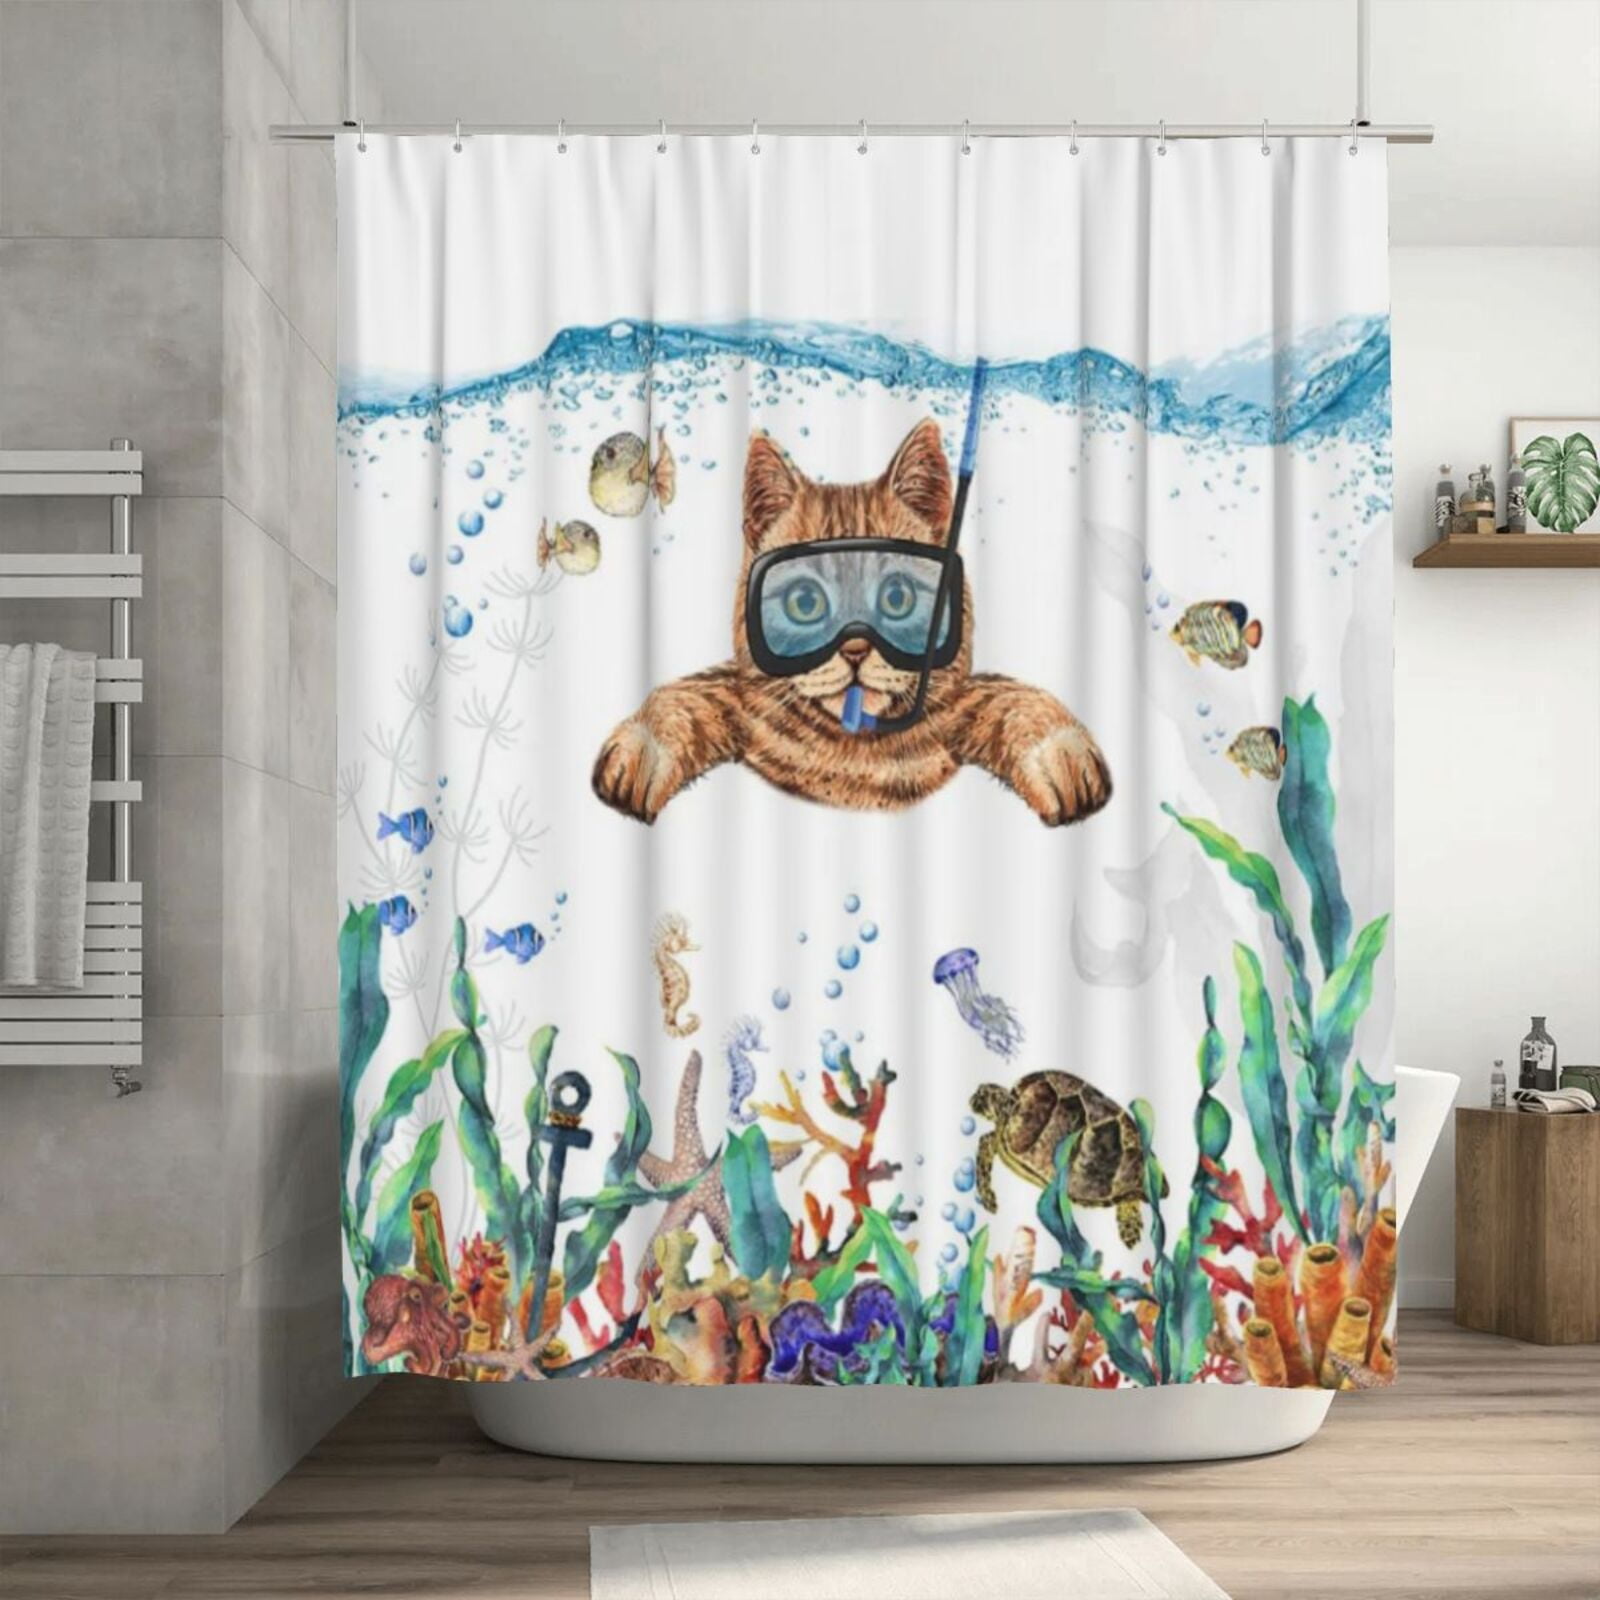 Cool Scuba Diving Cat Shower Curtain for Bathroom, Tropical Fish